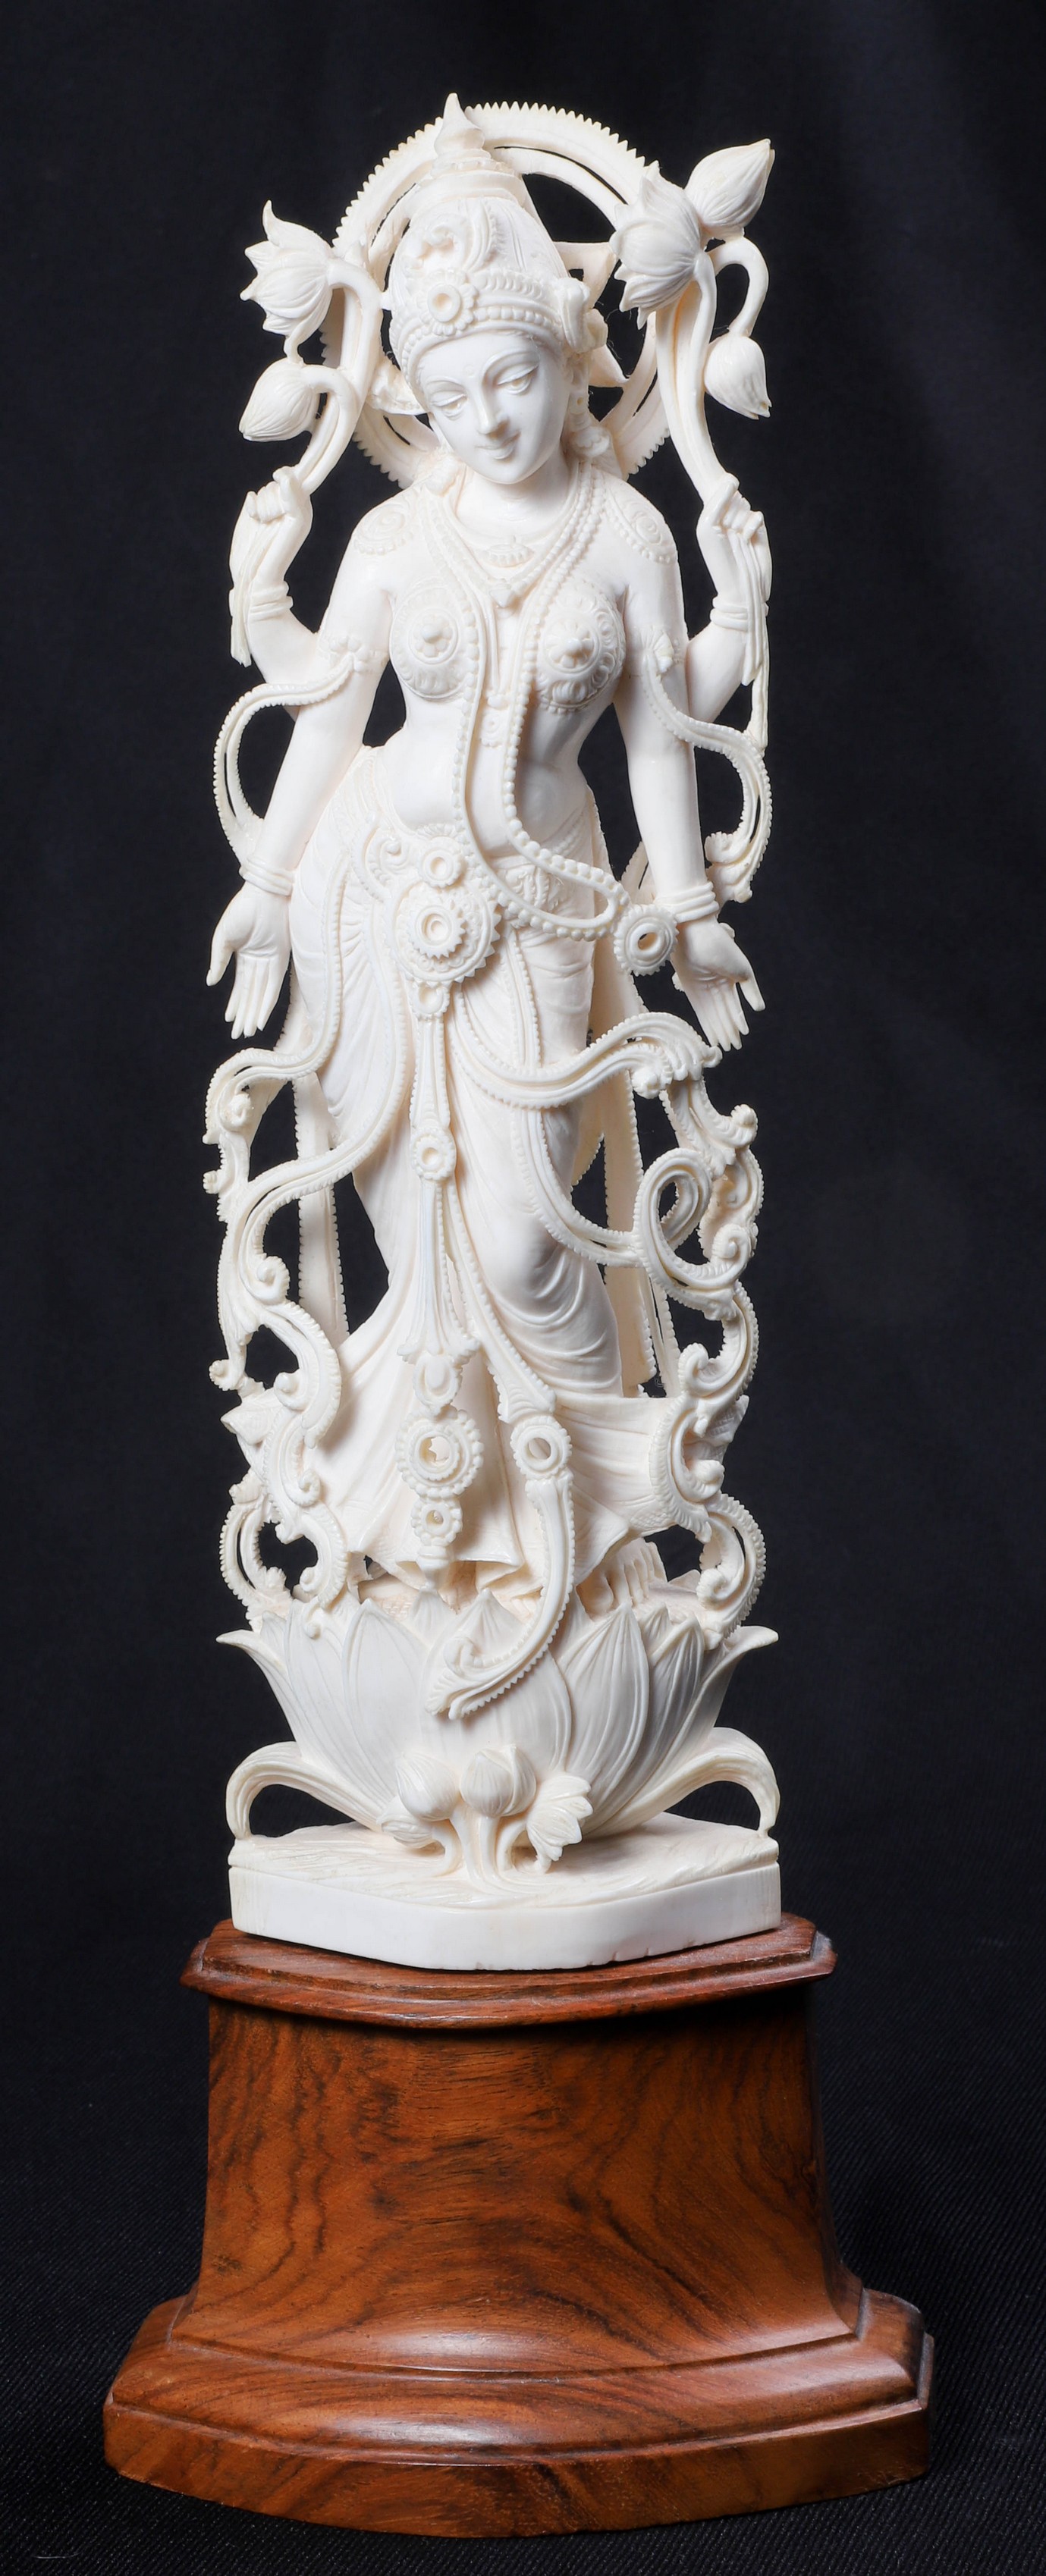 An Ivory Carving of Lord Venugopala,